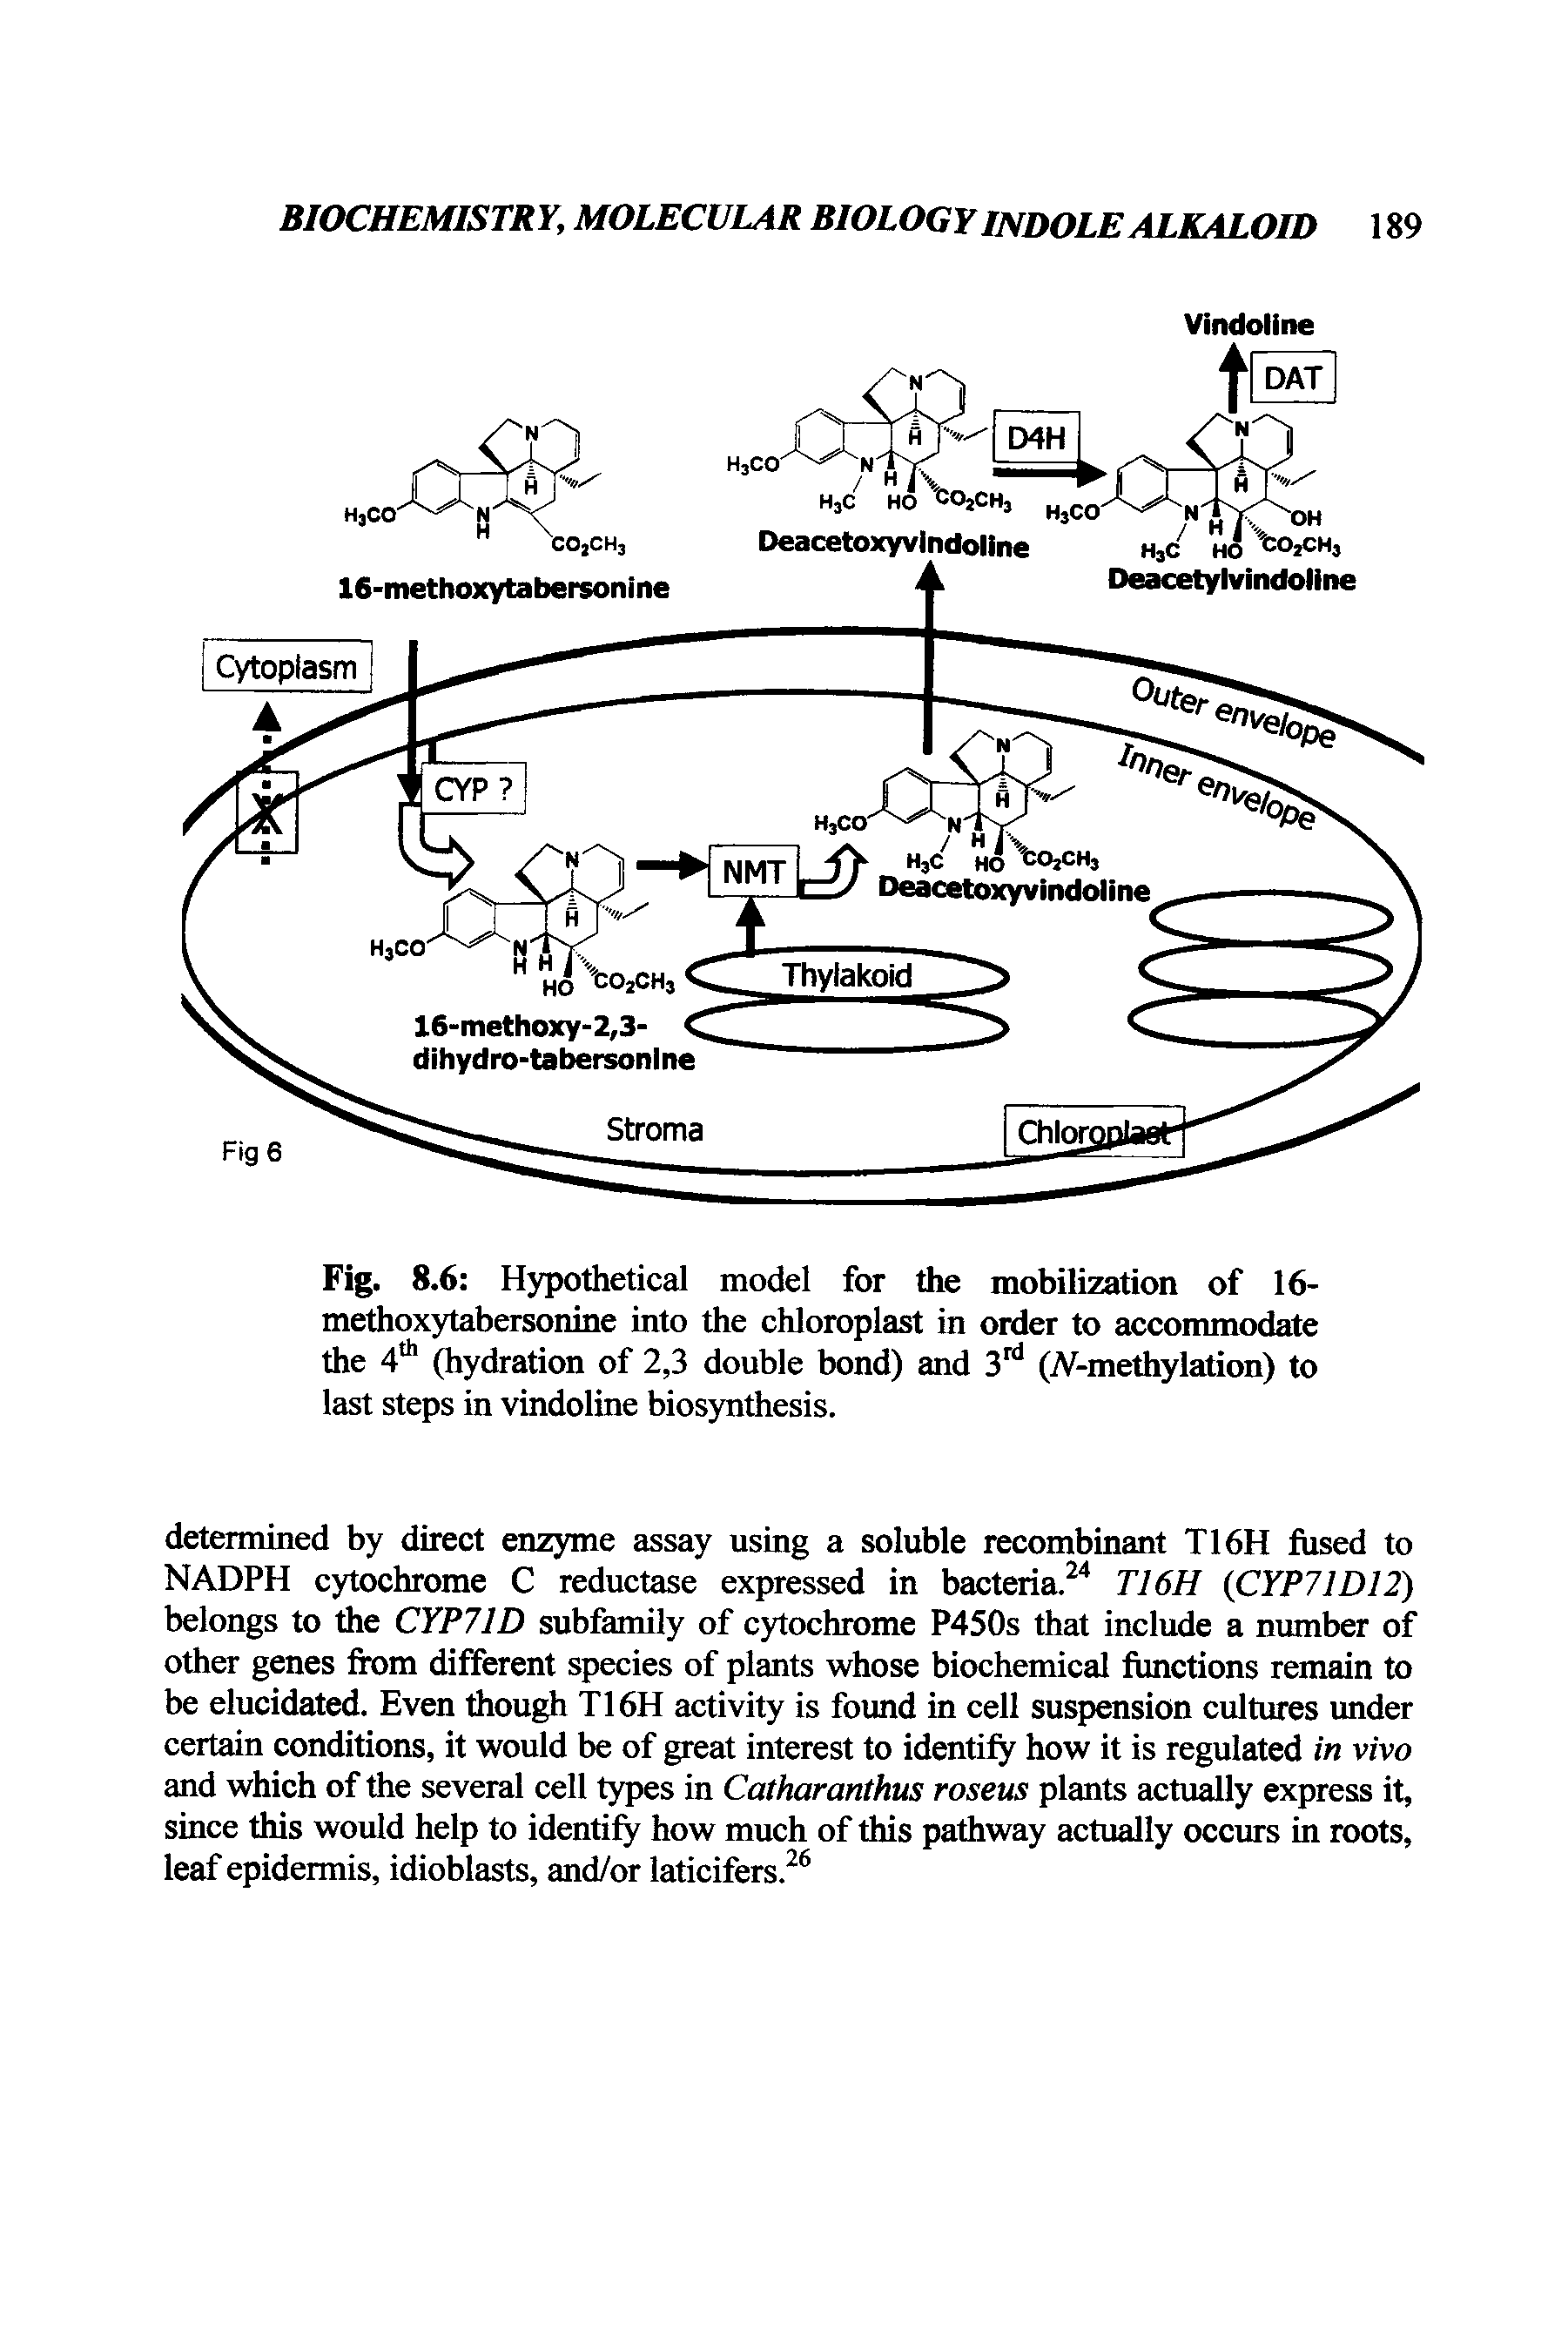 Fig. 8.6 Hypothetical model for the mobilization of 16-methoxytabersonine into the chloroplast in order to accommodate the 4th (hydration of 2,3 double bond) and 3rd (iV-methylation) to last steps in vindoline biosynthesis.